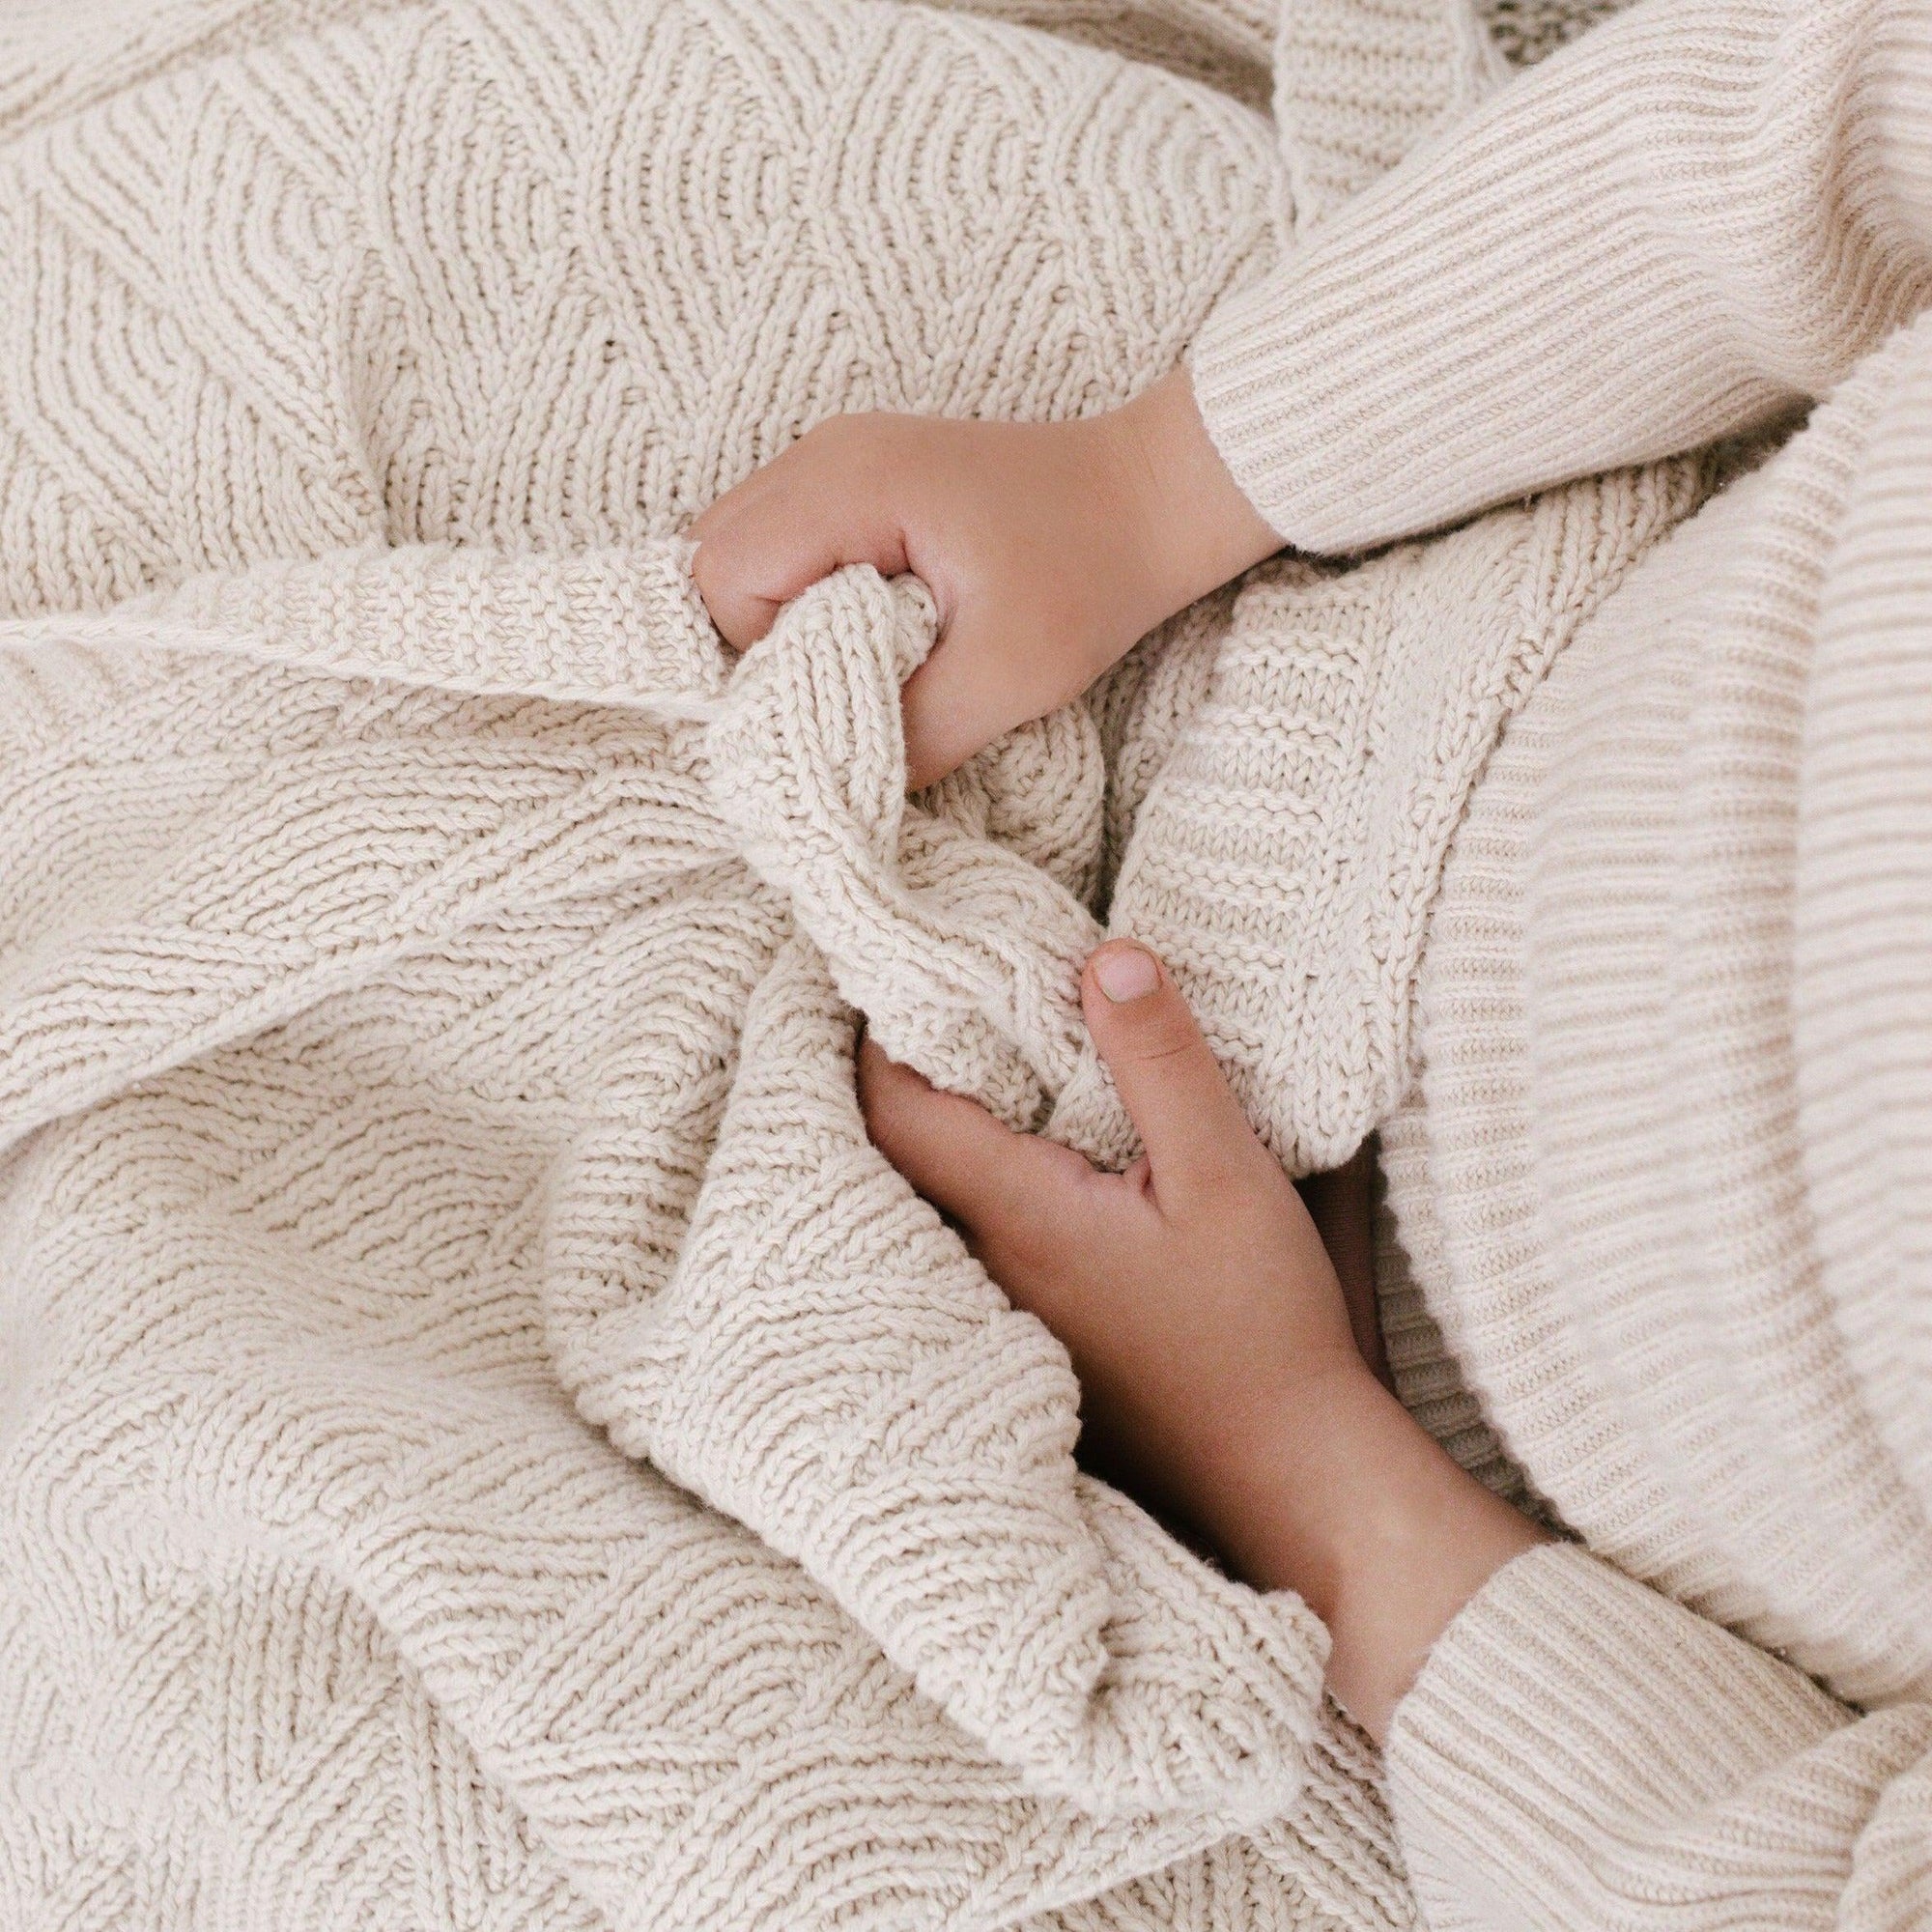 A person holding a Bundl. knitted organic cotton blanket on a bed.